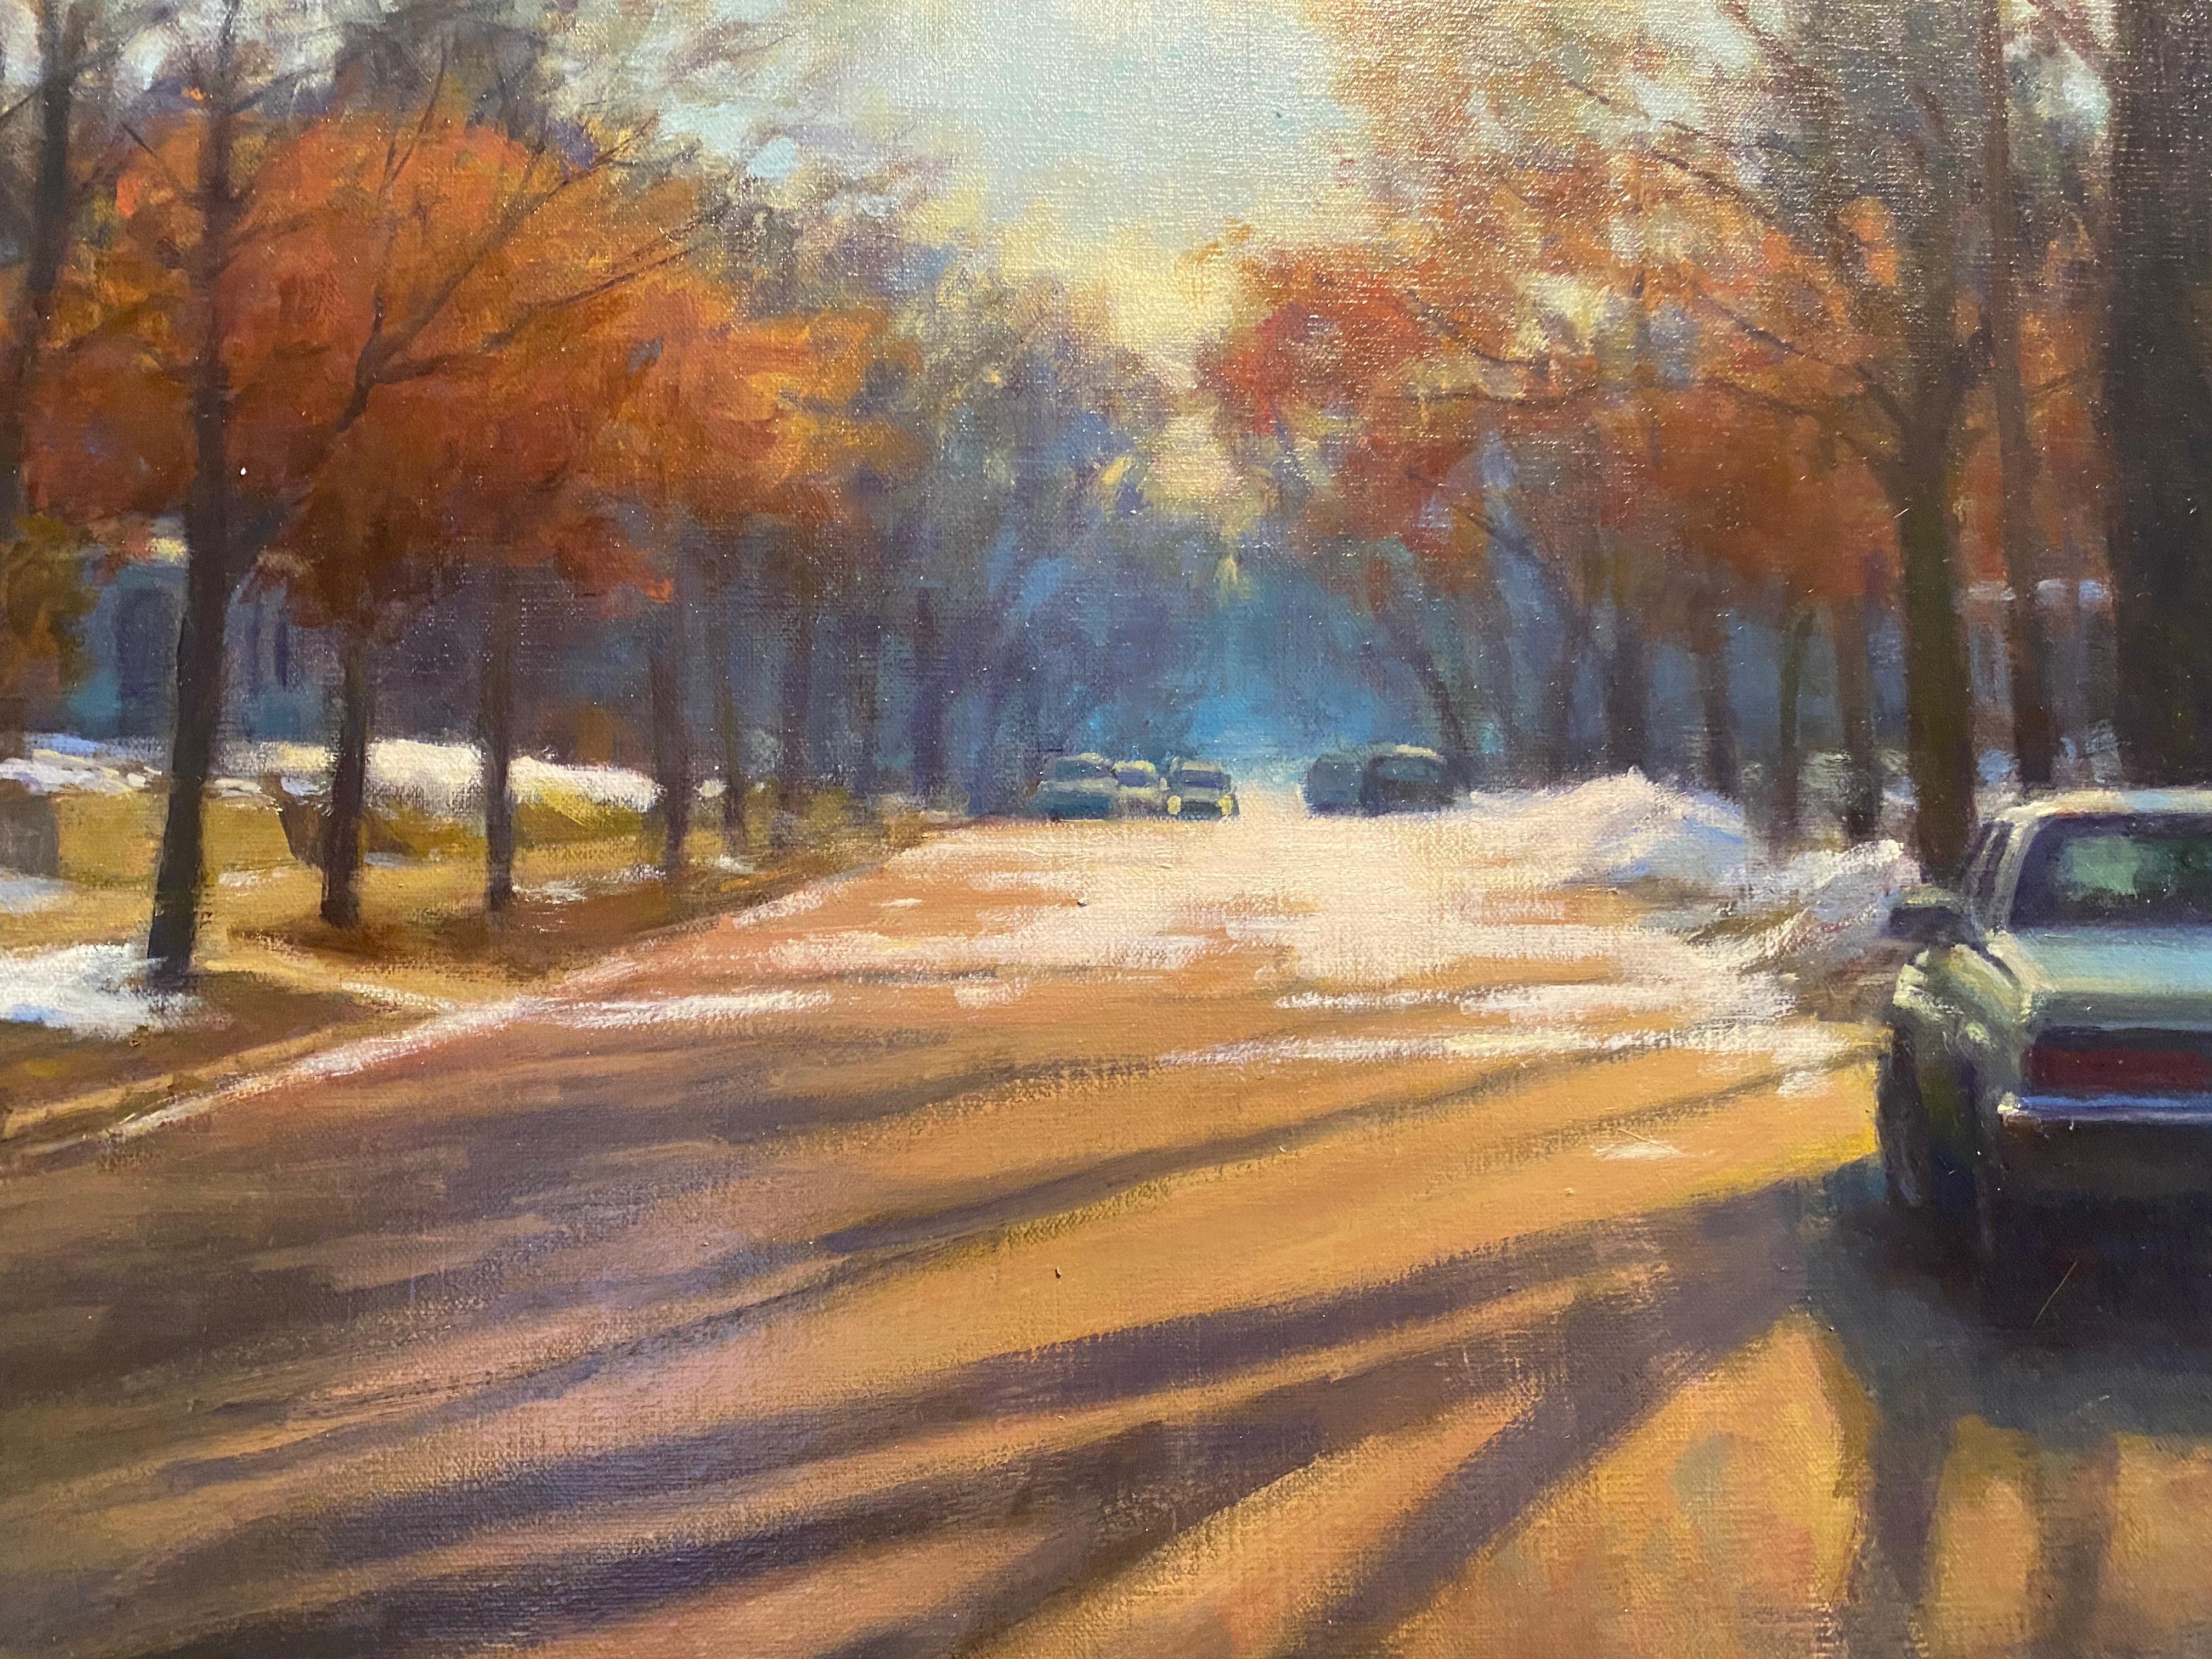 Oil painting of a neighborhood in the winter. A quiet, tree-lined street is sprinkled with snow. A yellow sky blends into blue and above. 

Frame dimensions: 32 x 44 inches


Artist Bio
Carl Bretzke is a representational painter who specializes in